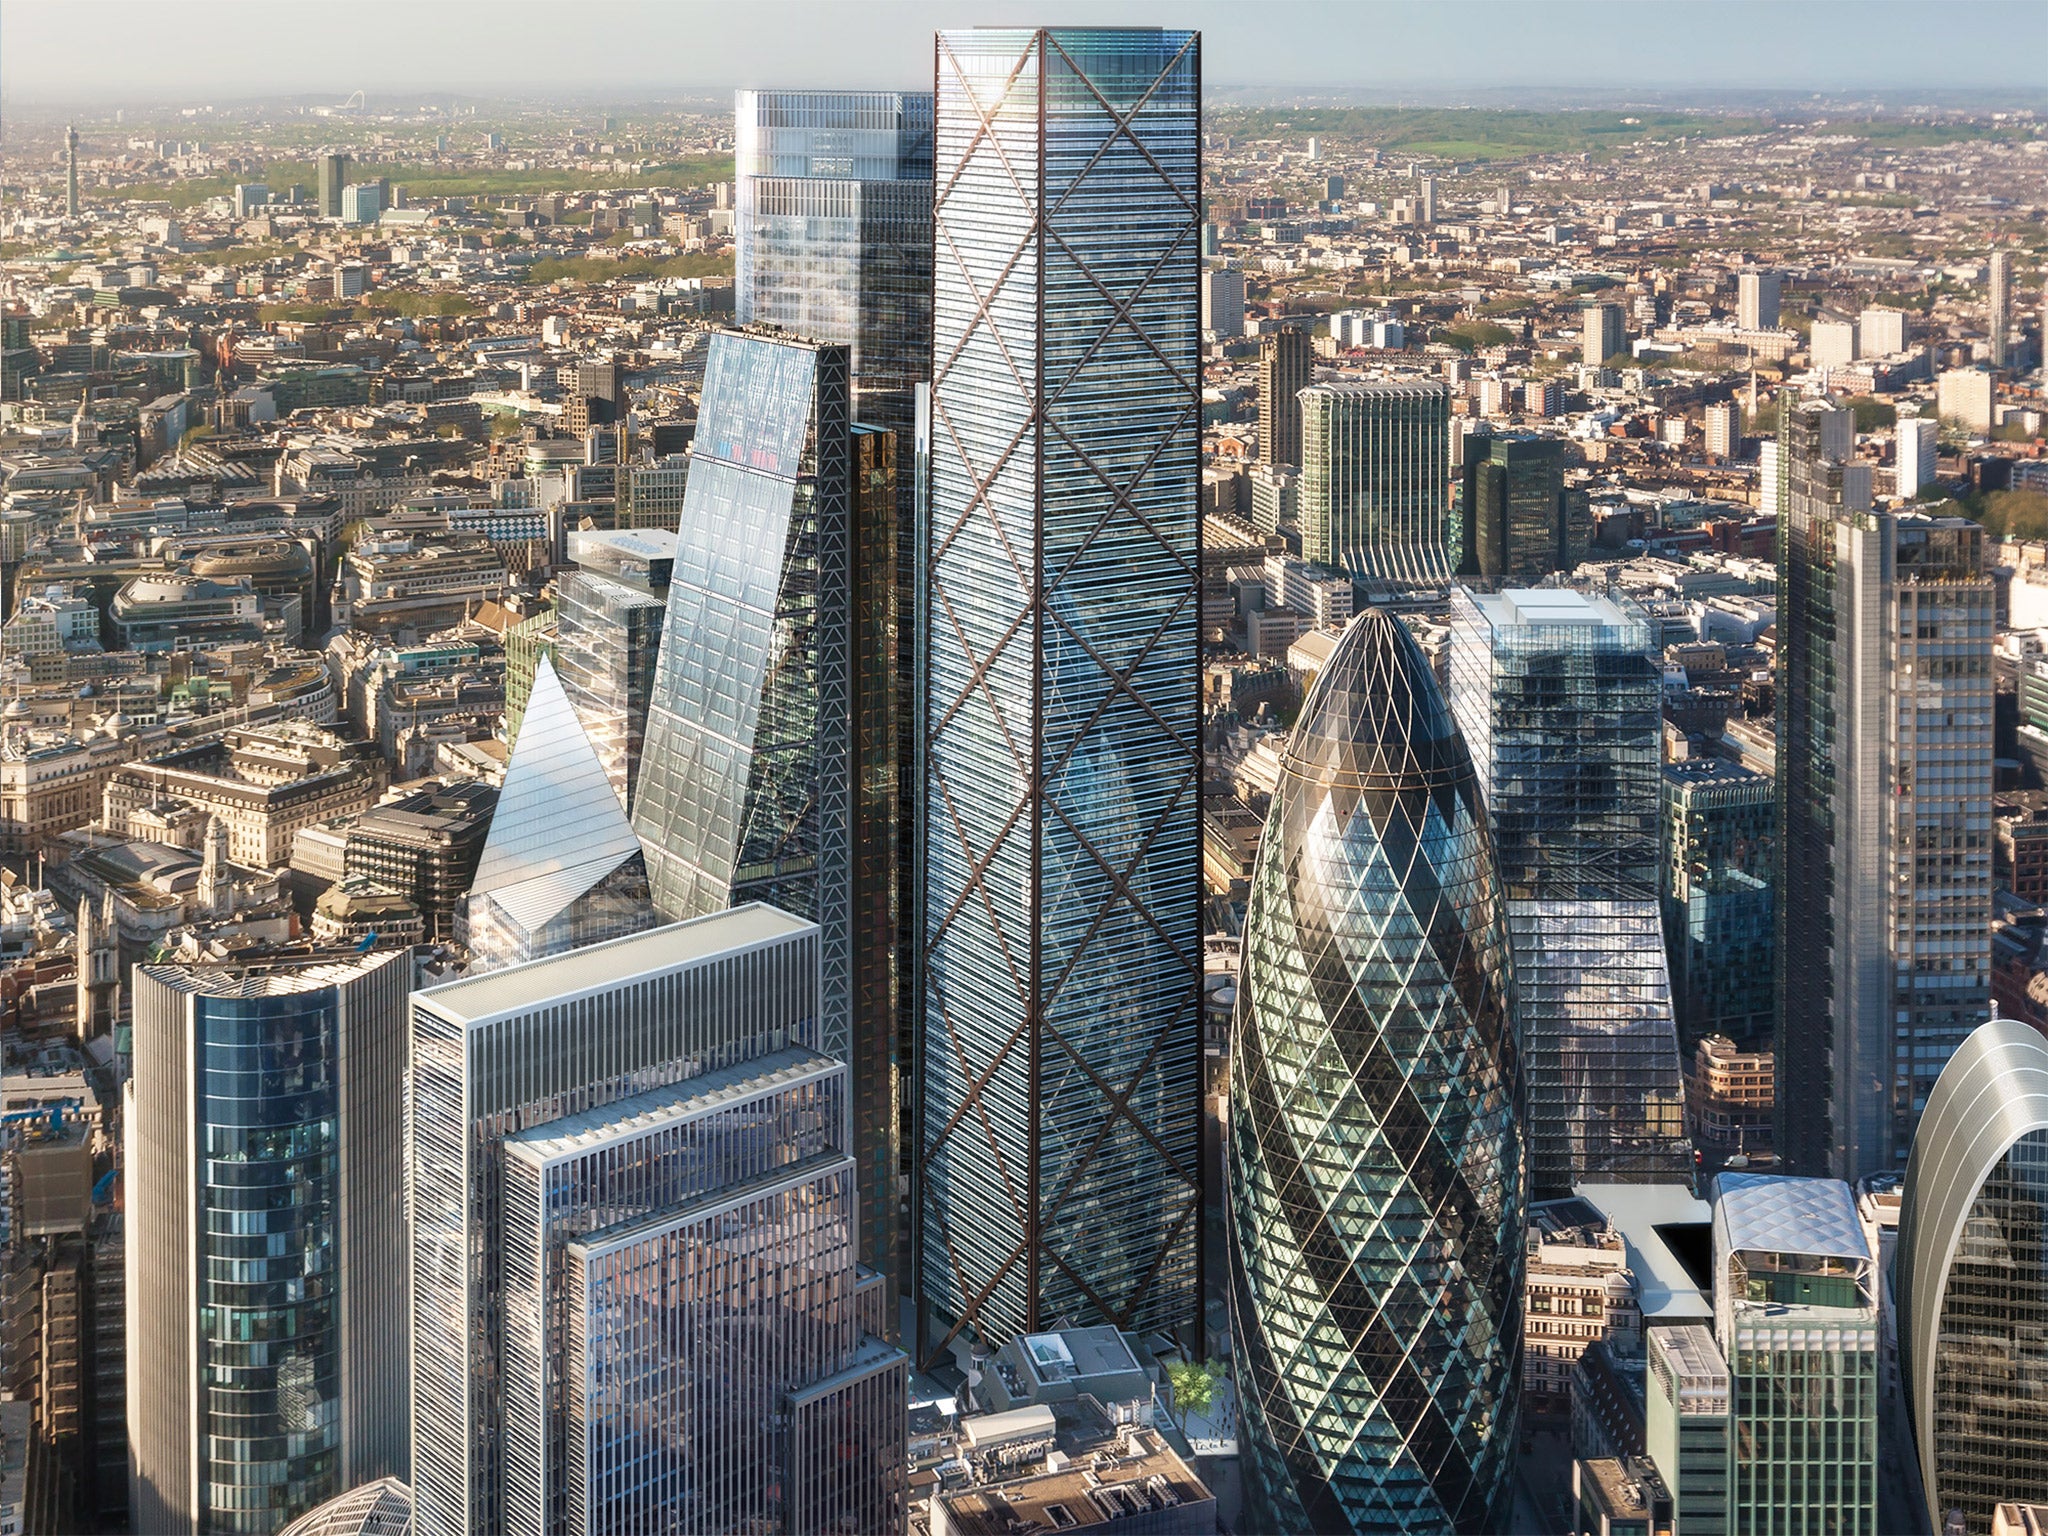 London's new skyscrapers 'inflict serious harm' on capital's